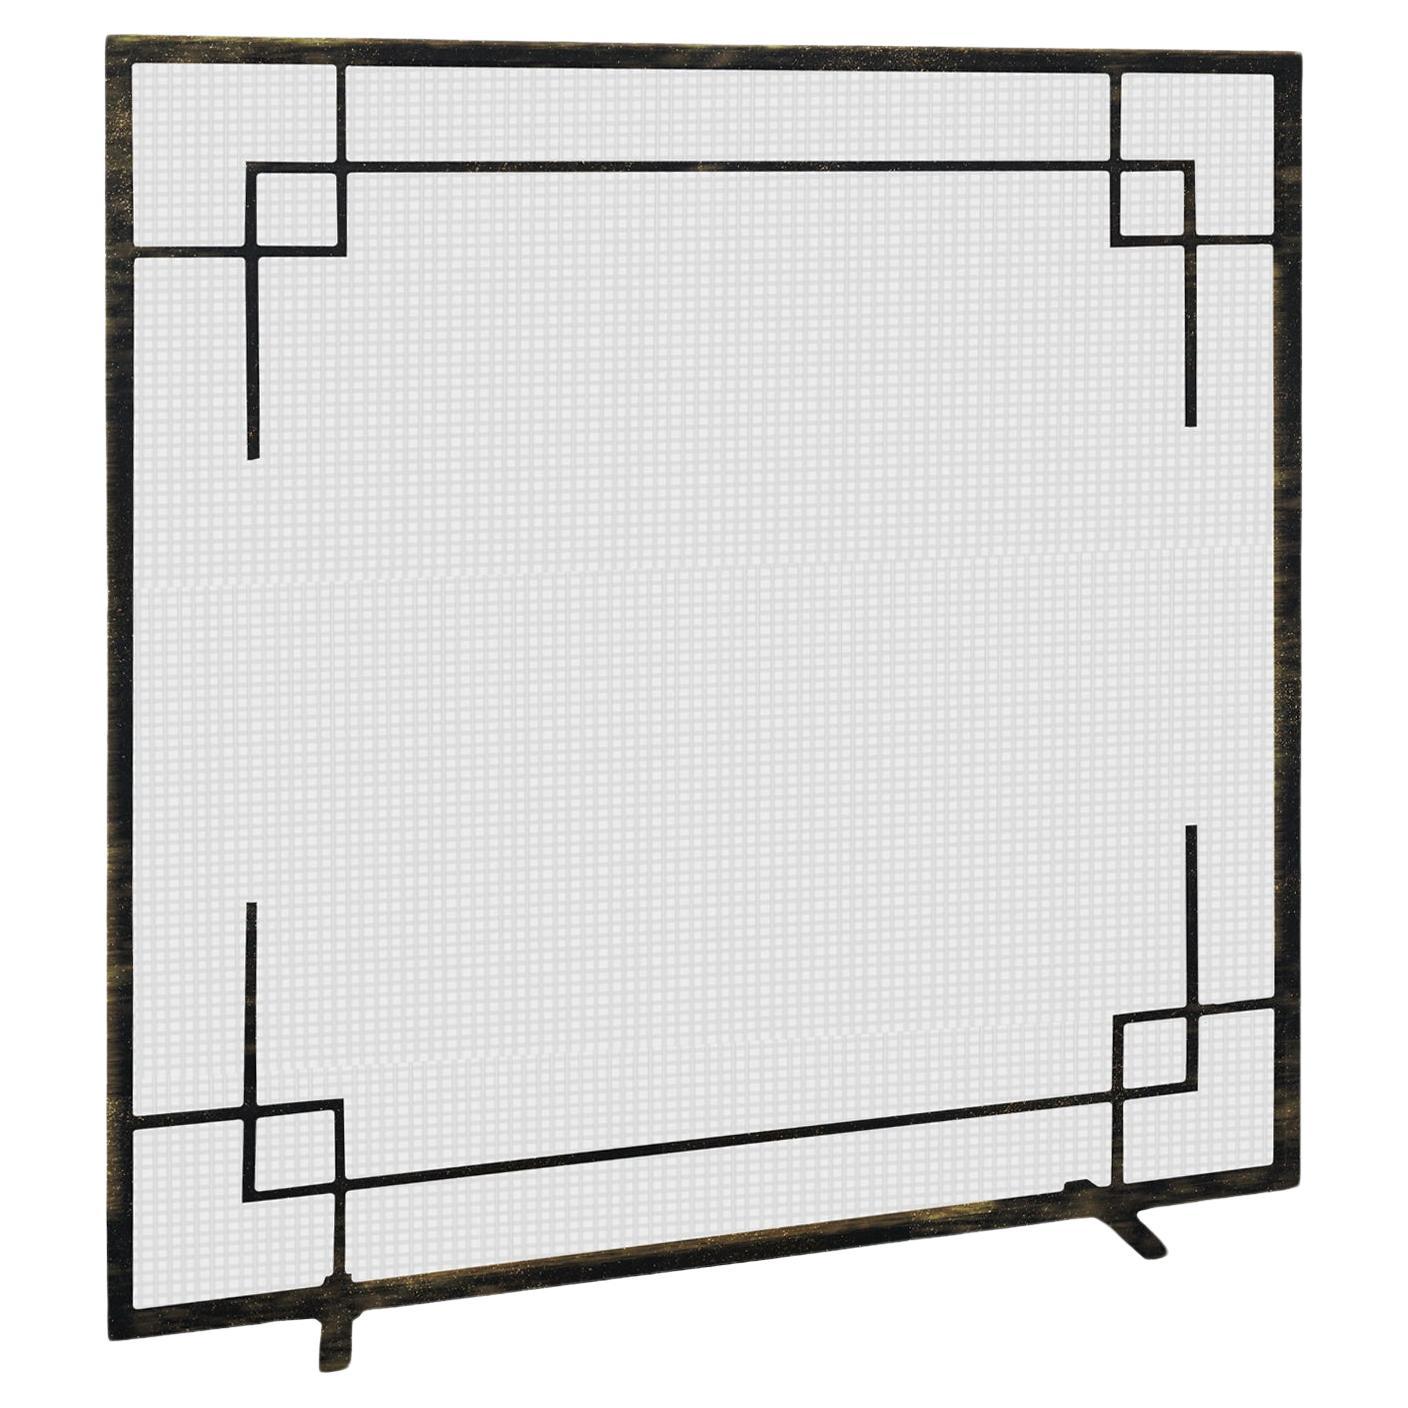 Evelynne Fireplace Screen in a Gold Rubbed Black Finish, Ready to Ship For Sale